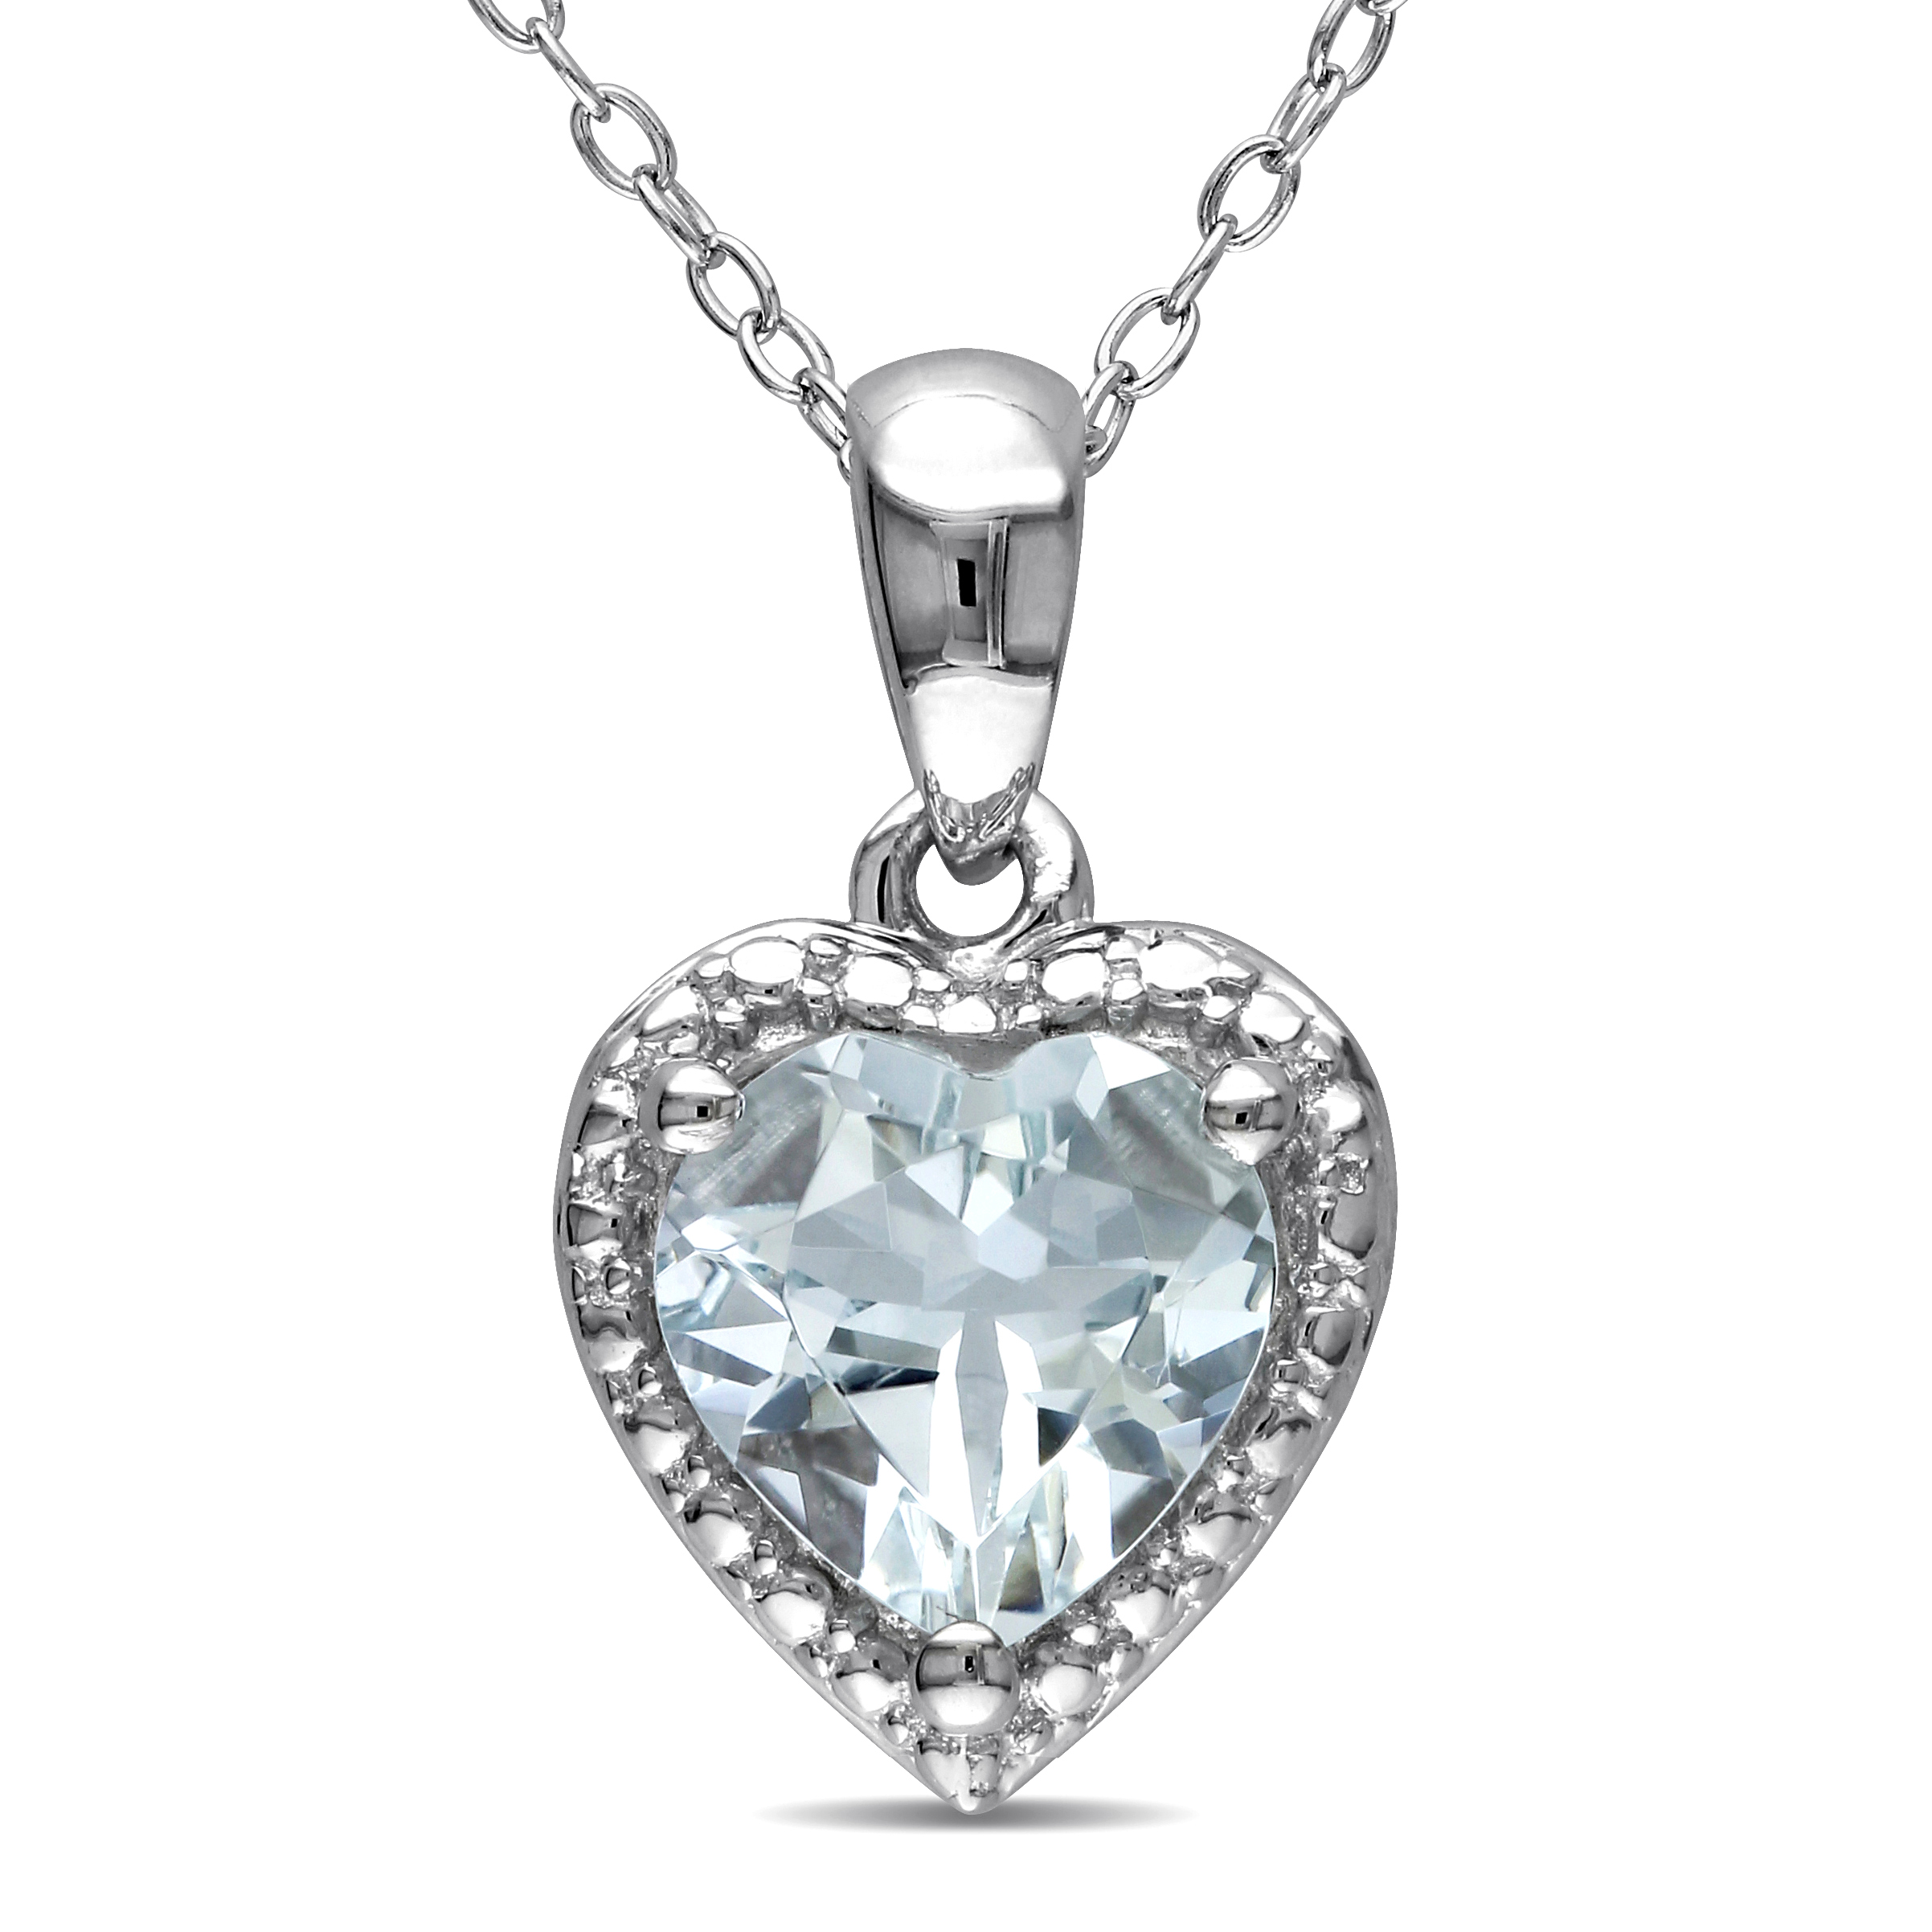 Aquamarine Heart Halo Pendant with Chain in Sterling Silver